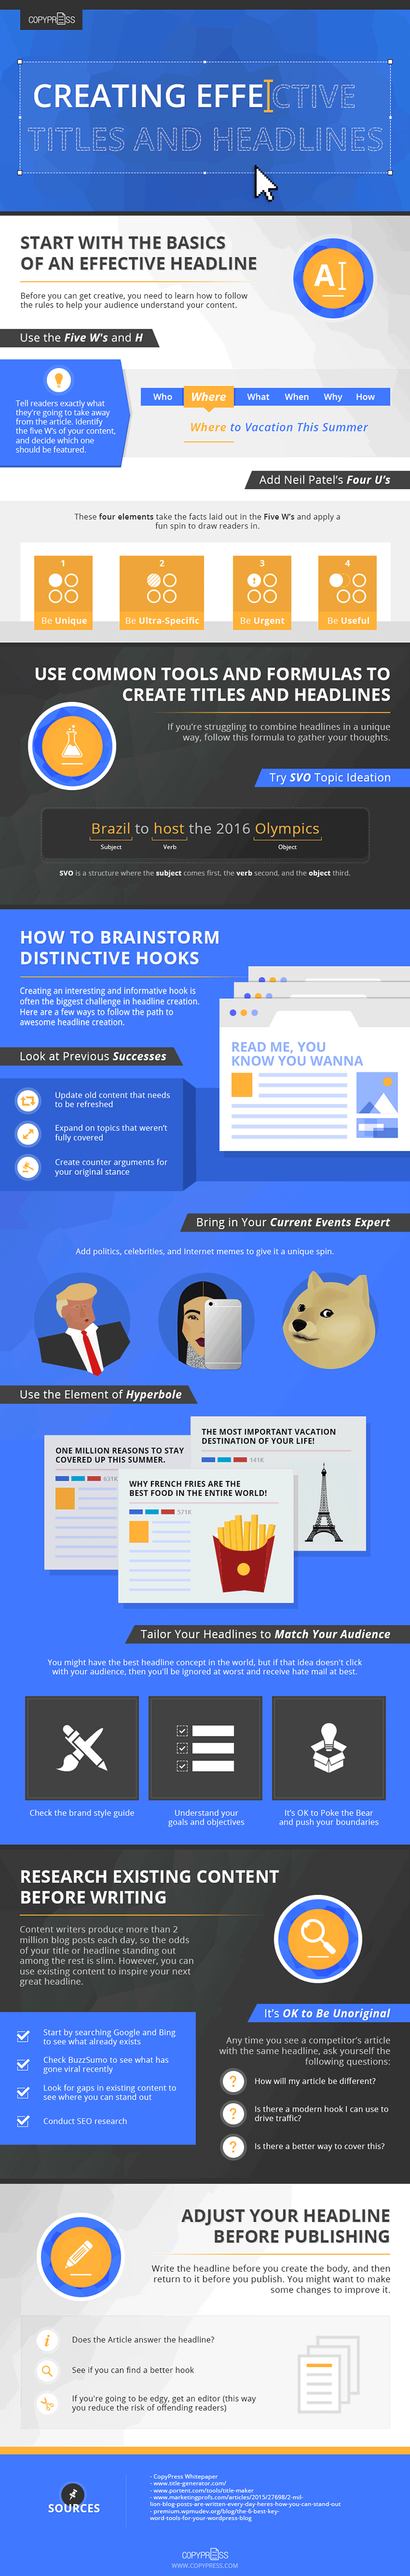 infographic show